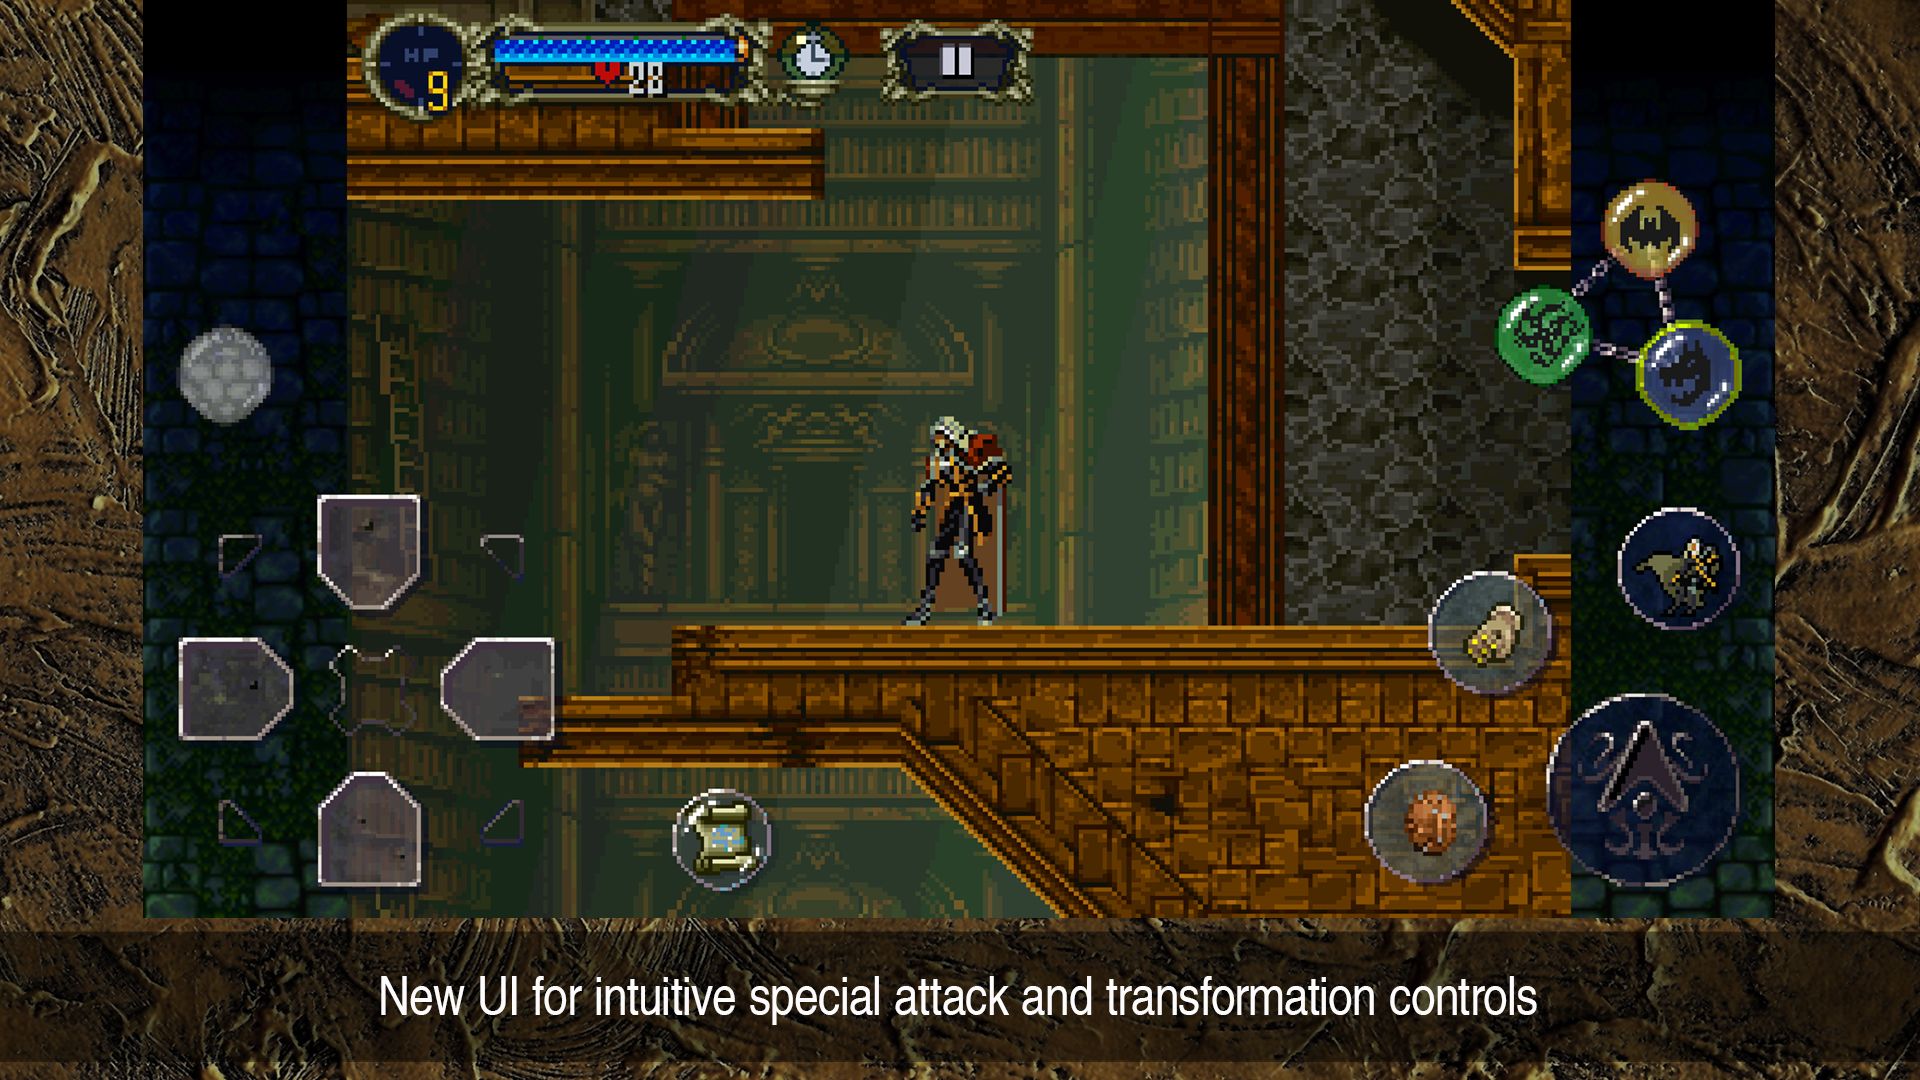 terbaik-metroidvania-games-castlevania-simfoni-of-the-night-new-ui-for-intuitive-special-attack-and-transformation-controls